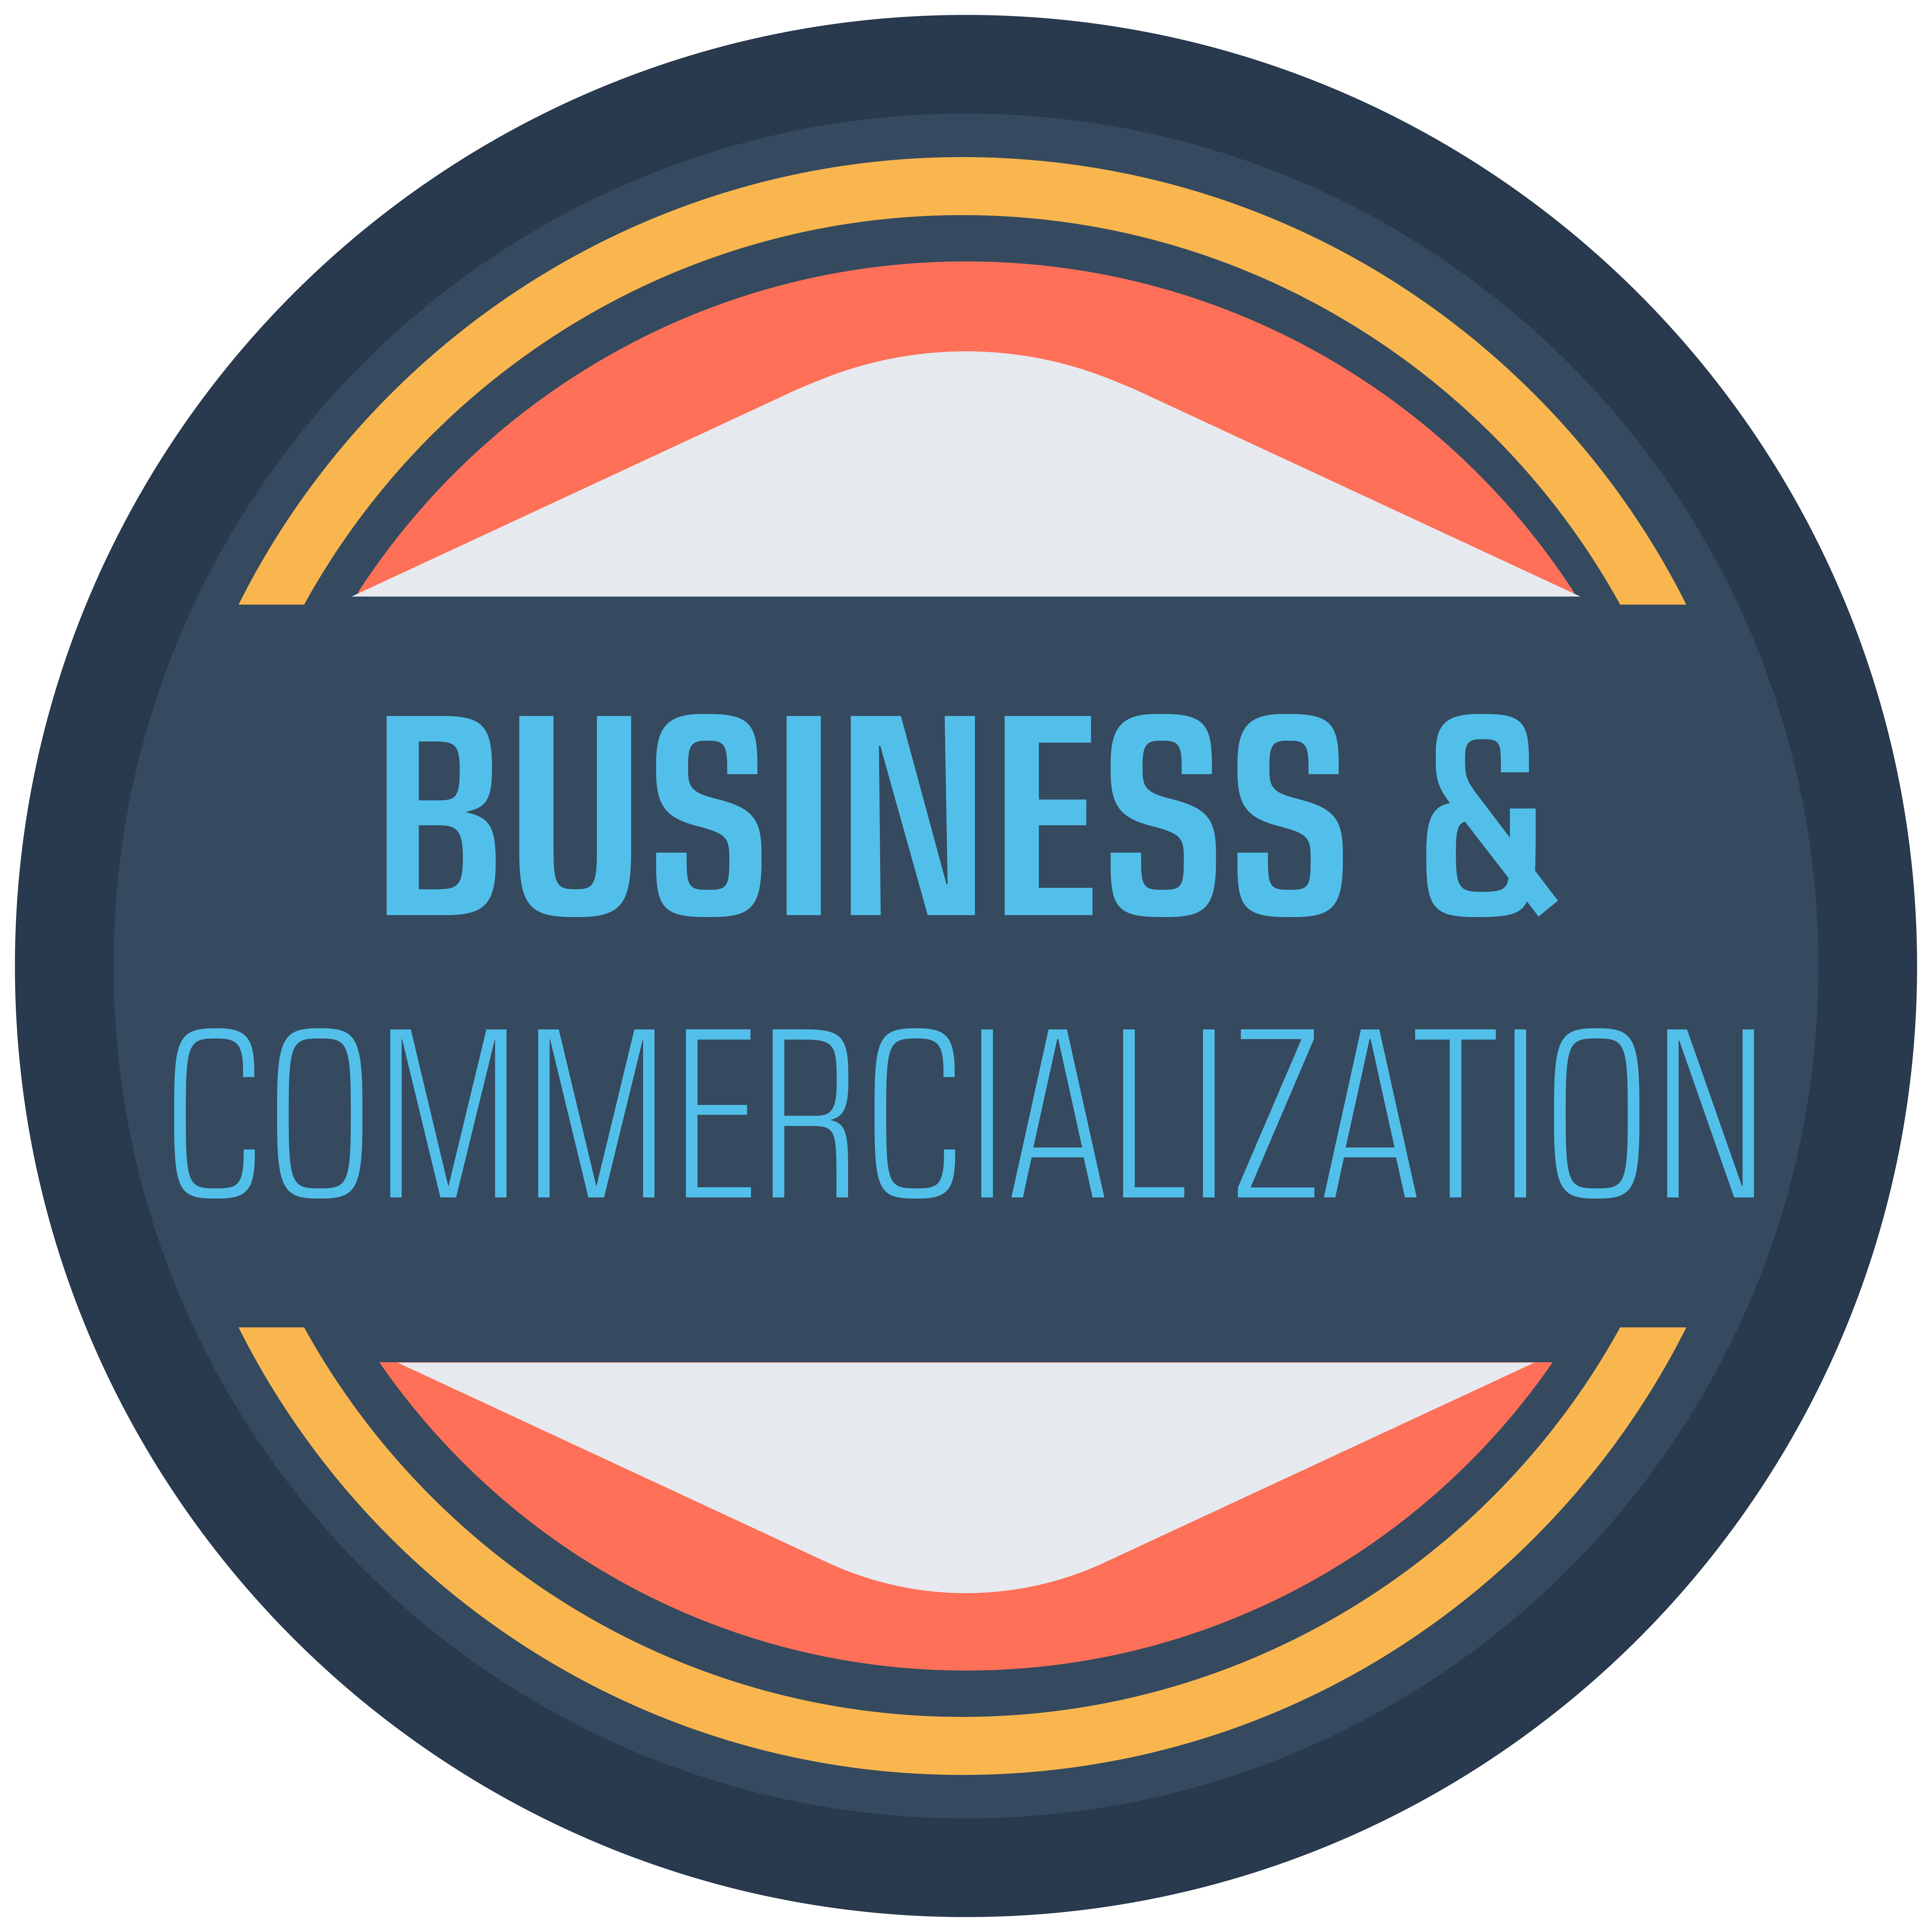 Business & Commercialization